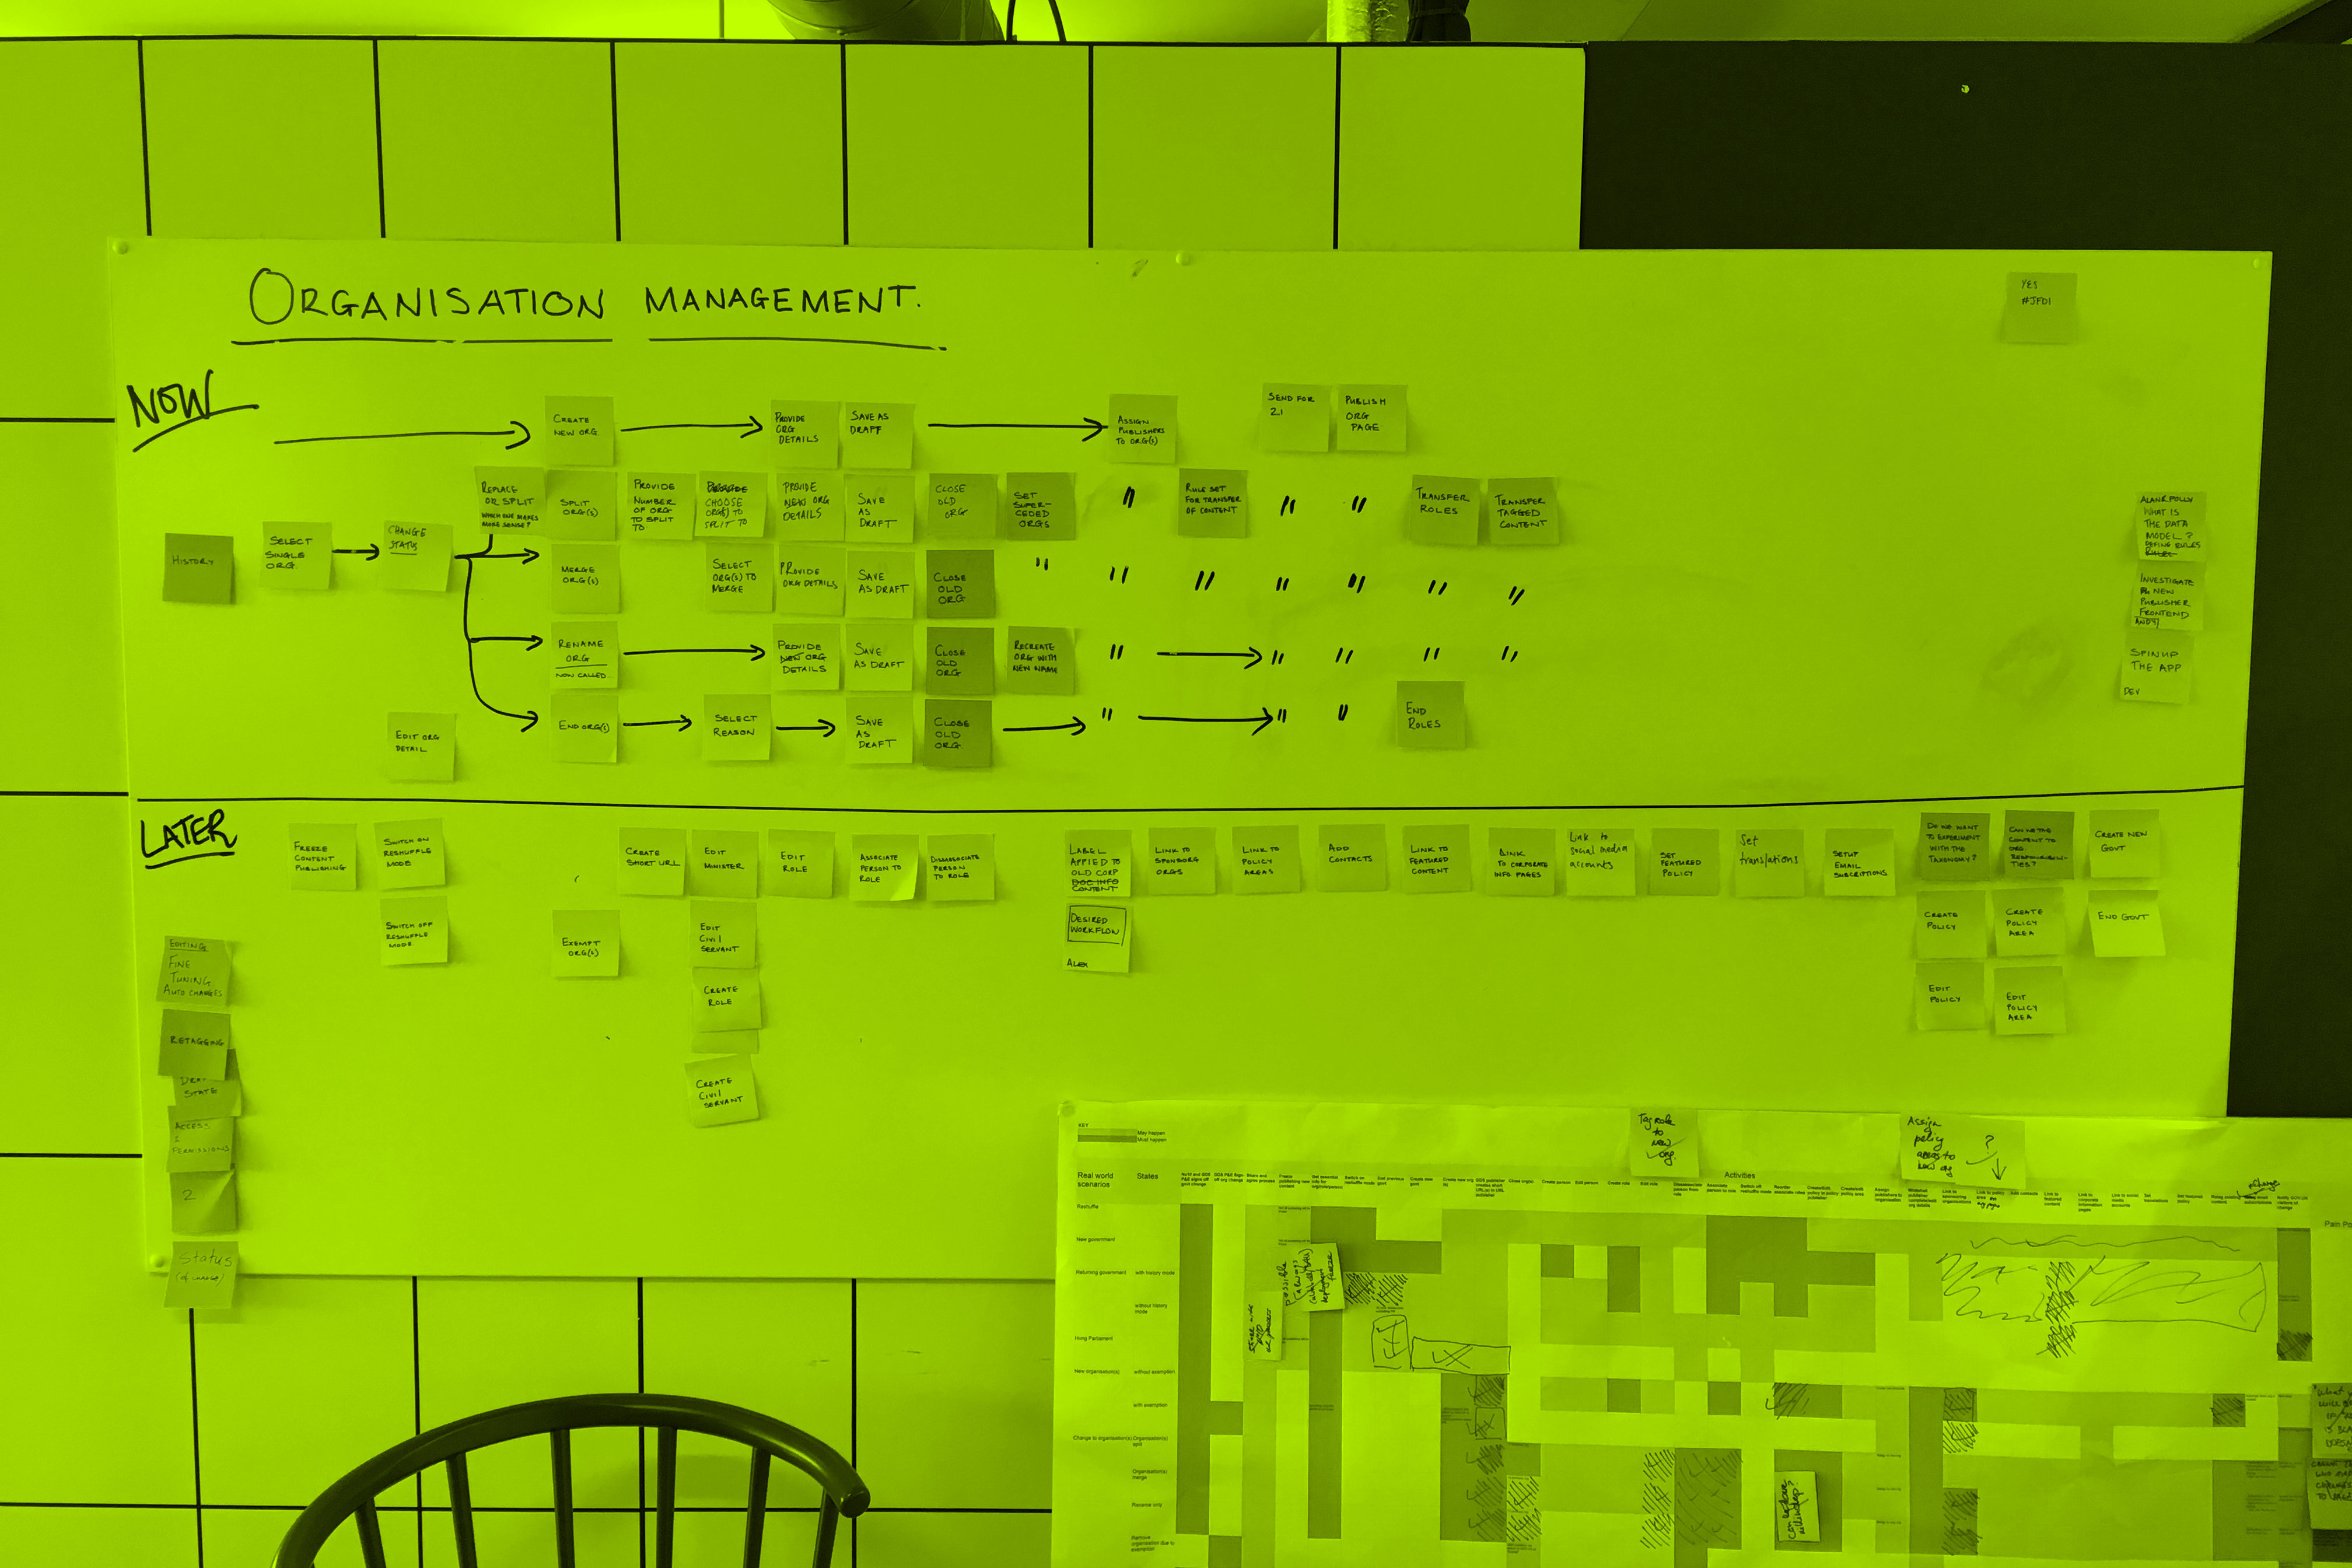 A publishing user journey shown on the wall